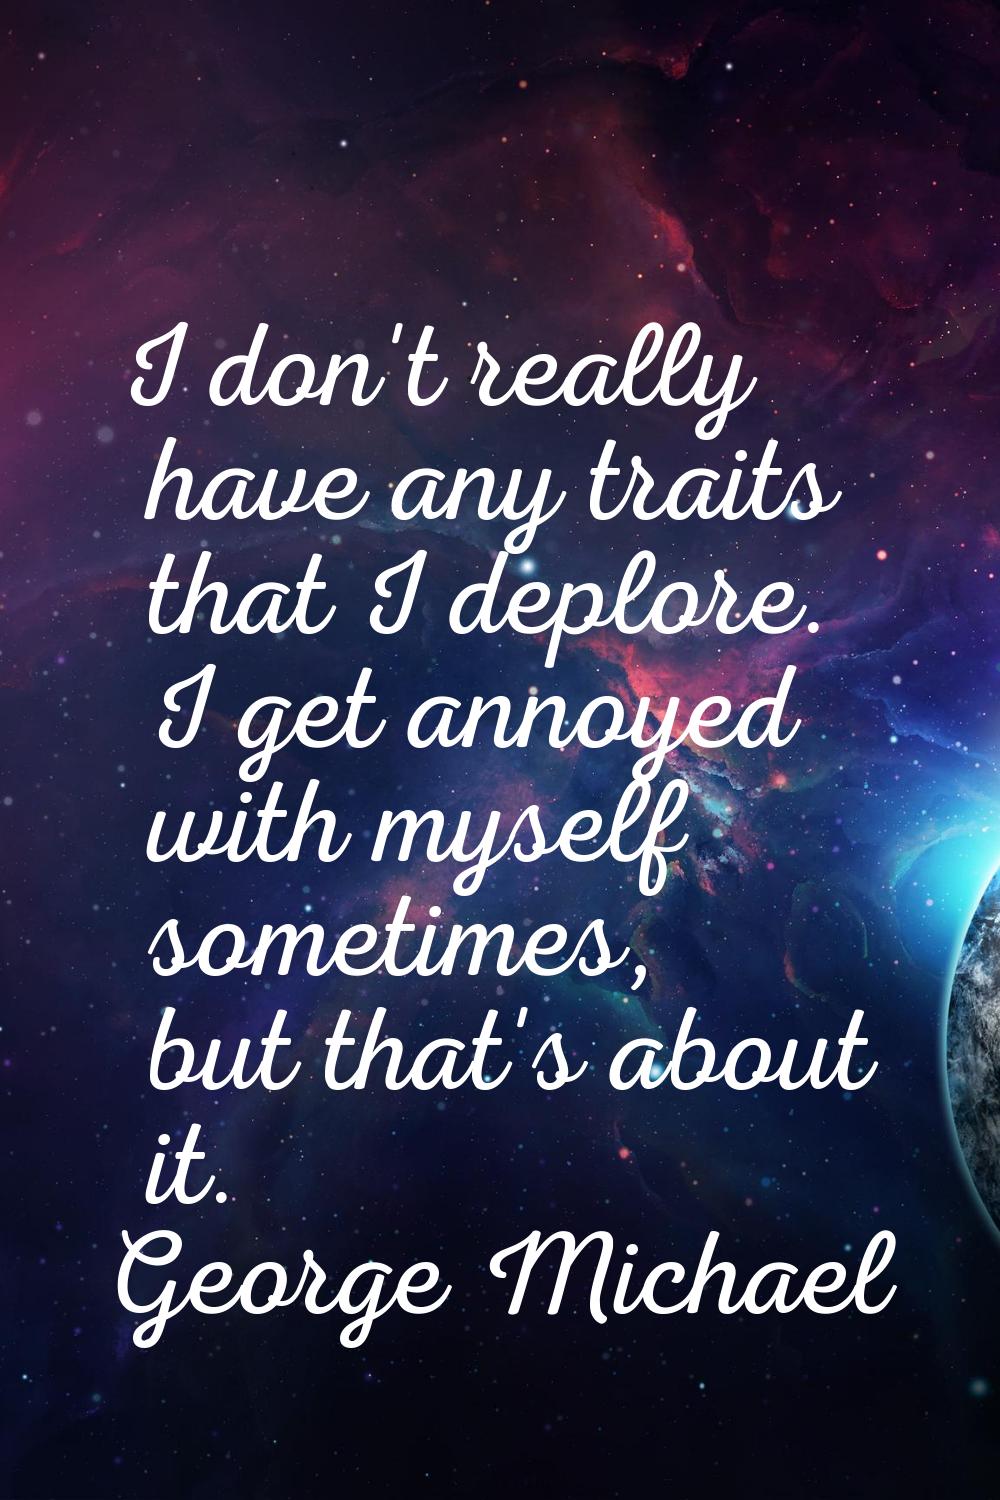 I don't really have any traits that I deplore. I get annoyed with myself sometimes, but that's abou